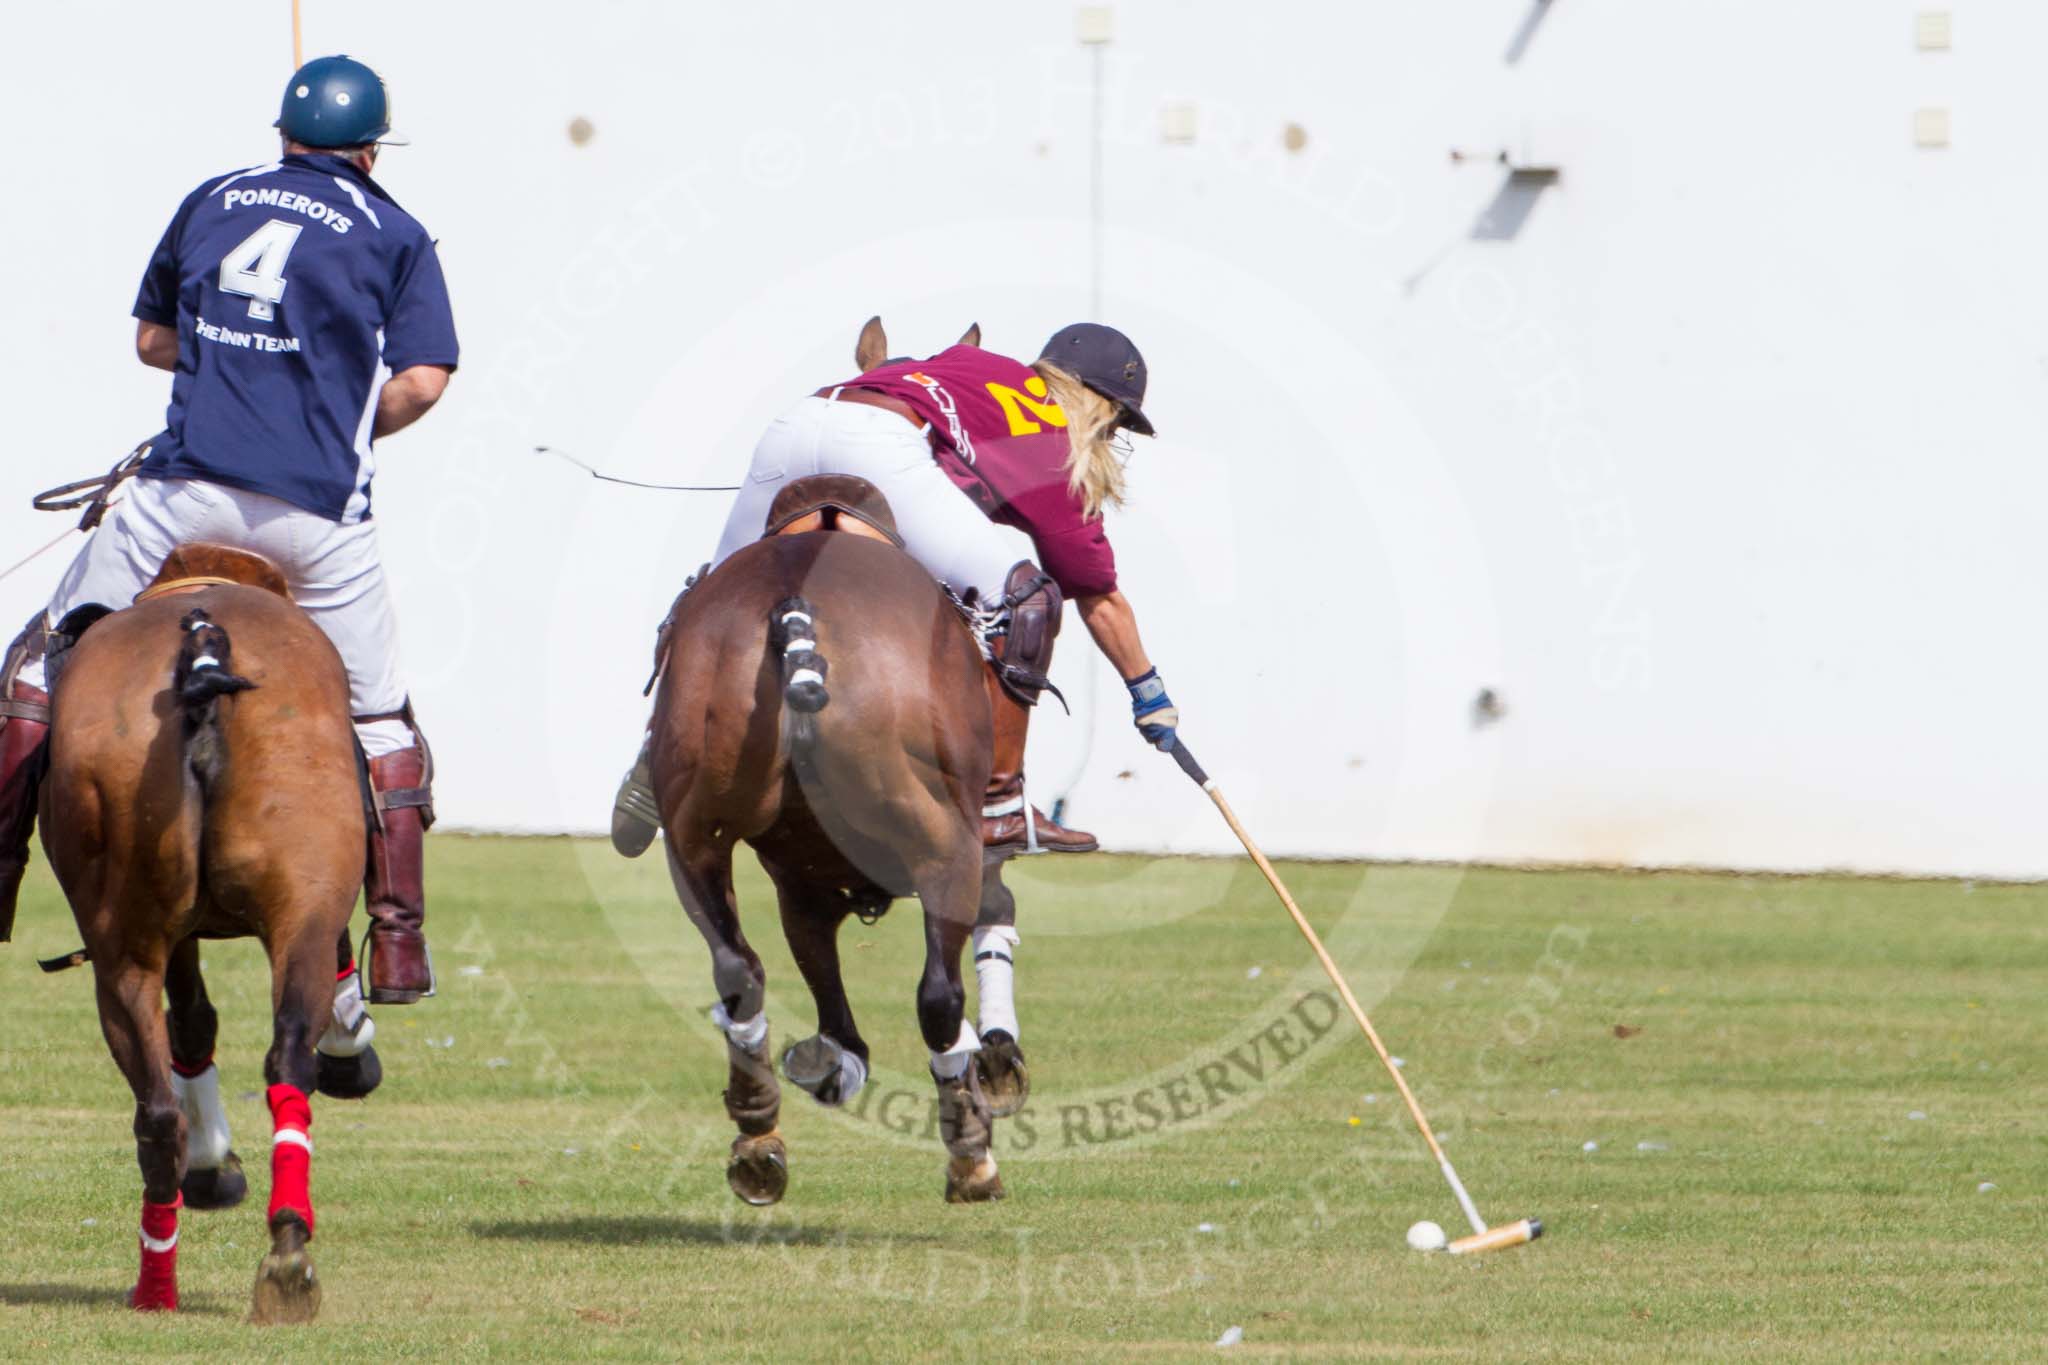 DBPC Polo in the Park 2013, Final of the Amaranther Trophy (0 Goal), Bucking Broncos vs The Inn Team.
Dallas Burston Polo Club, ,
Southam,
Warwickshire,
United Kingdom,
on 01 September 2013 at 11:55, image #141